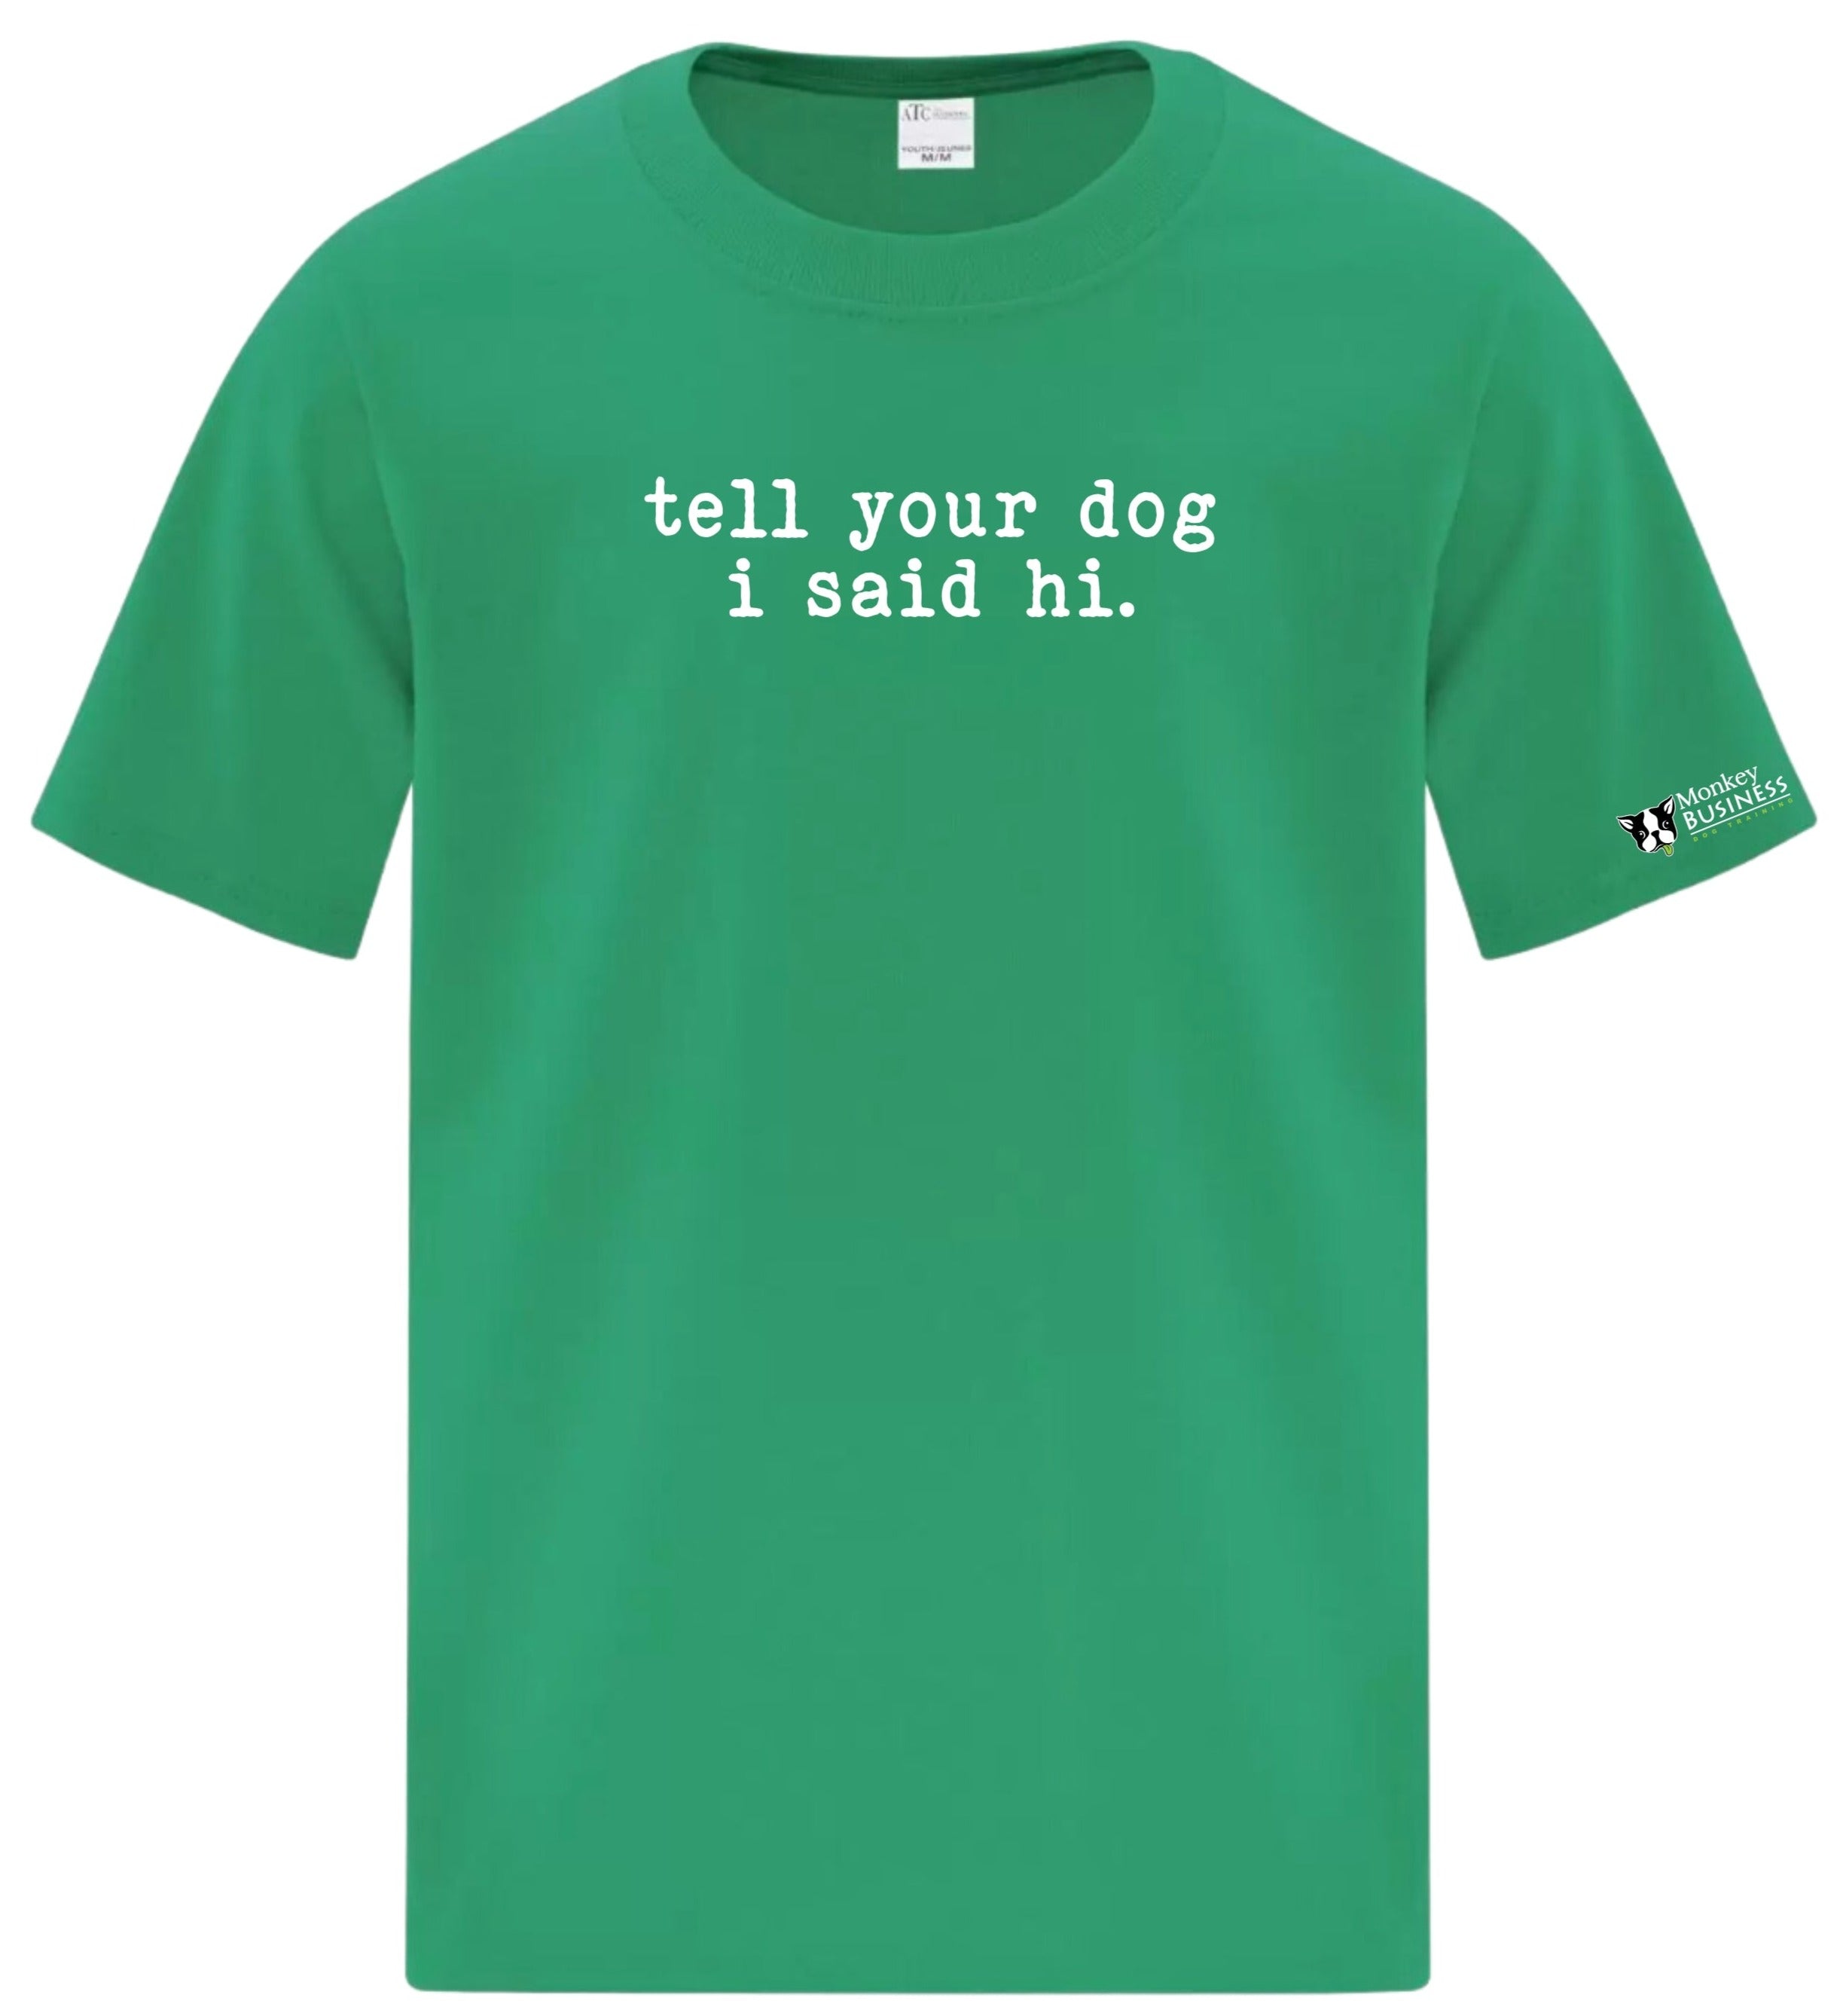 MB Youth T-Shirt- Say Hi To Your Dog